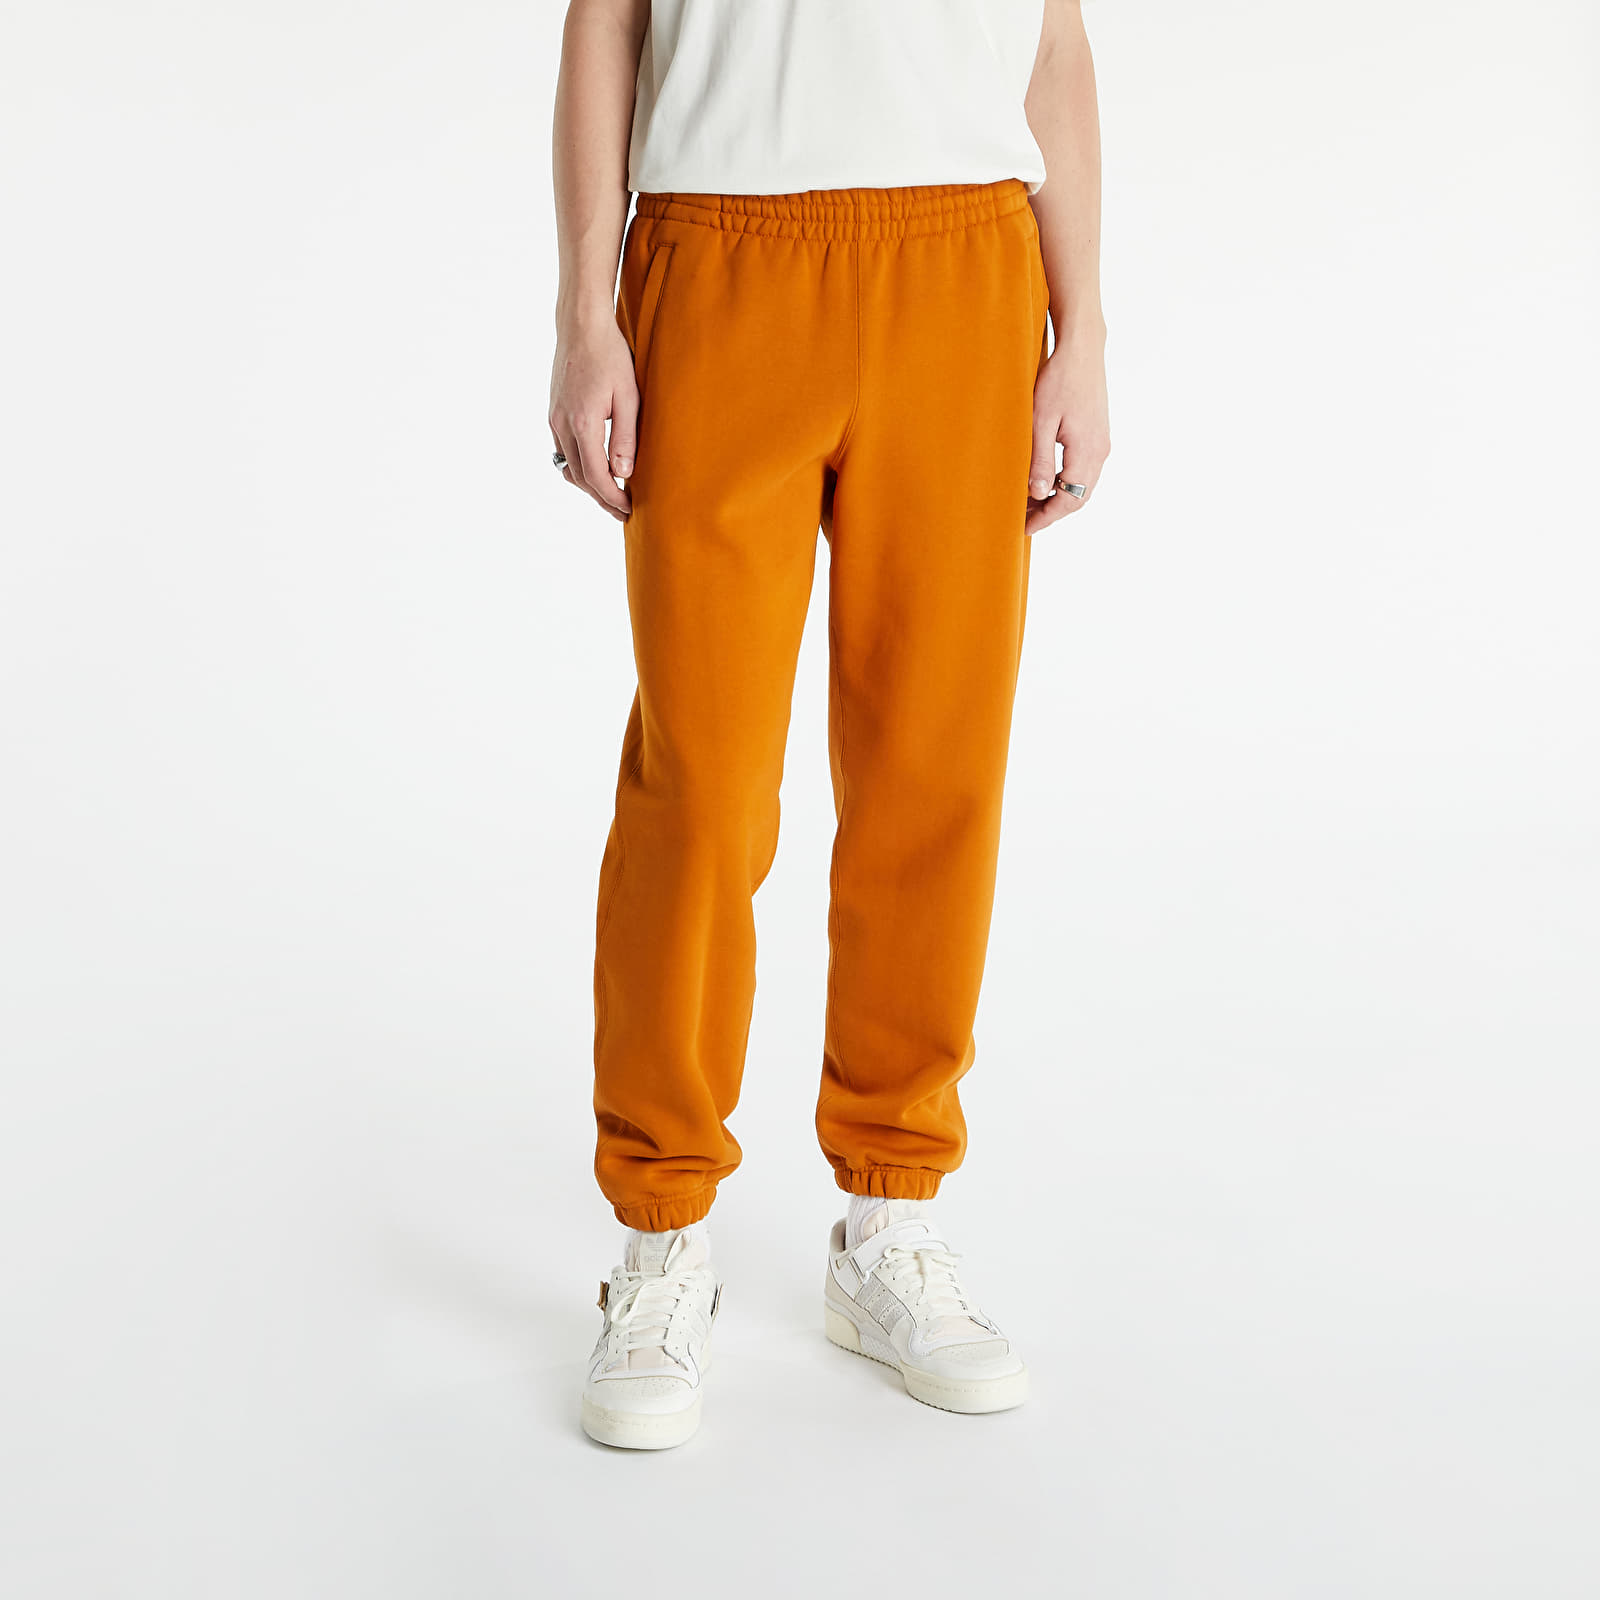 Pants and jeans adidas Adicolor Sweat Pants Craft Ochre